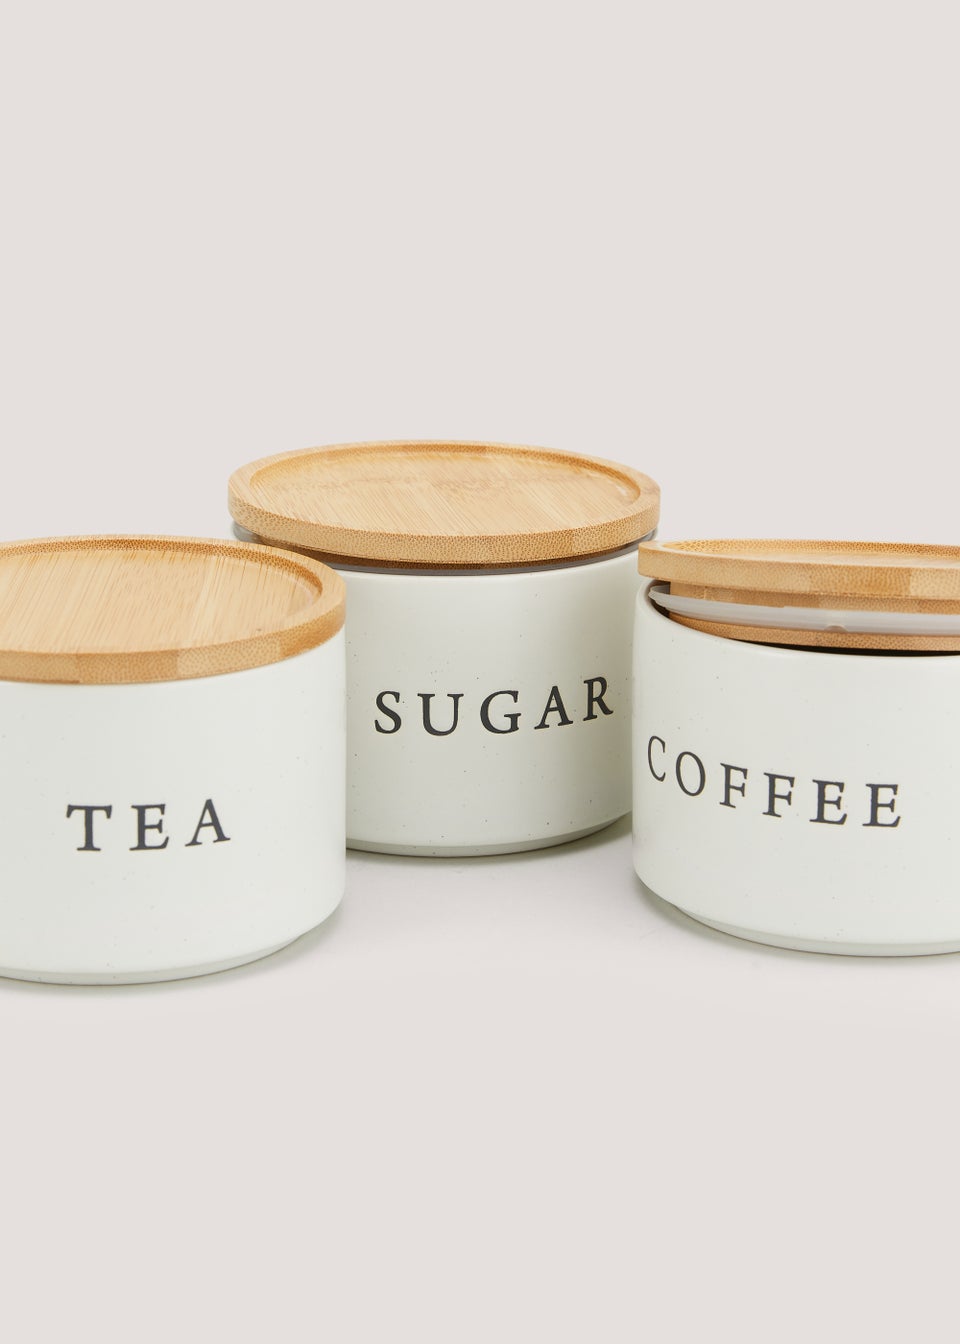 Cream Tea Coffee & Sugar Stackable Canisters (24cm x 11cm)